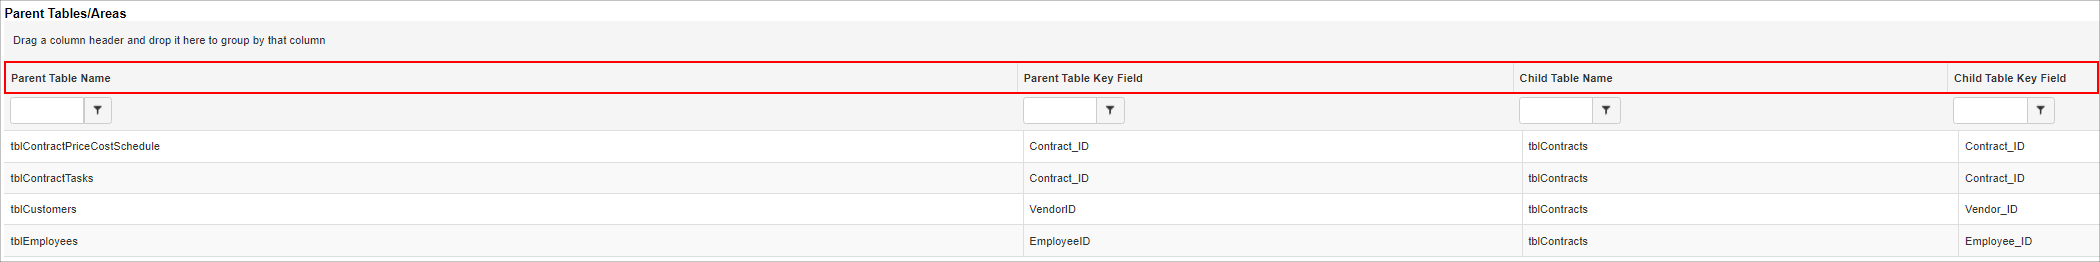 Sub-Table showing Parent Tables, Parent Table Key Field, and Child Table Name